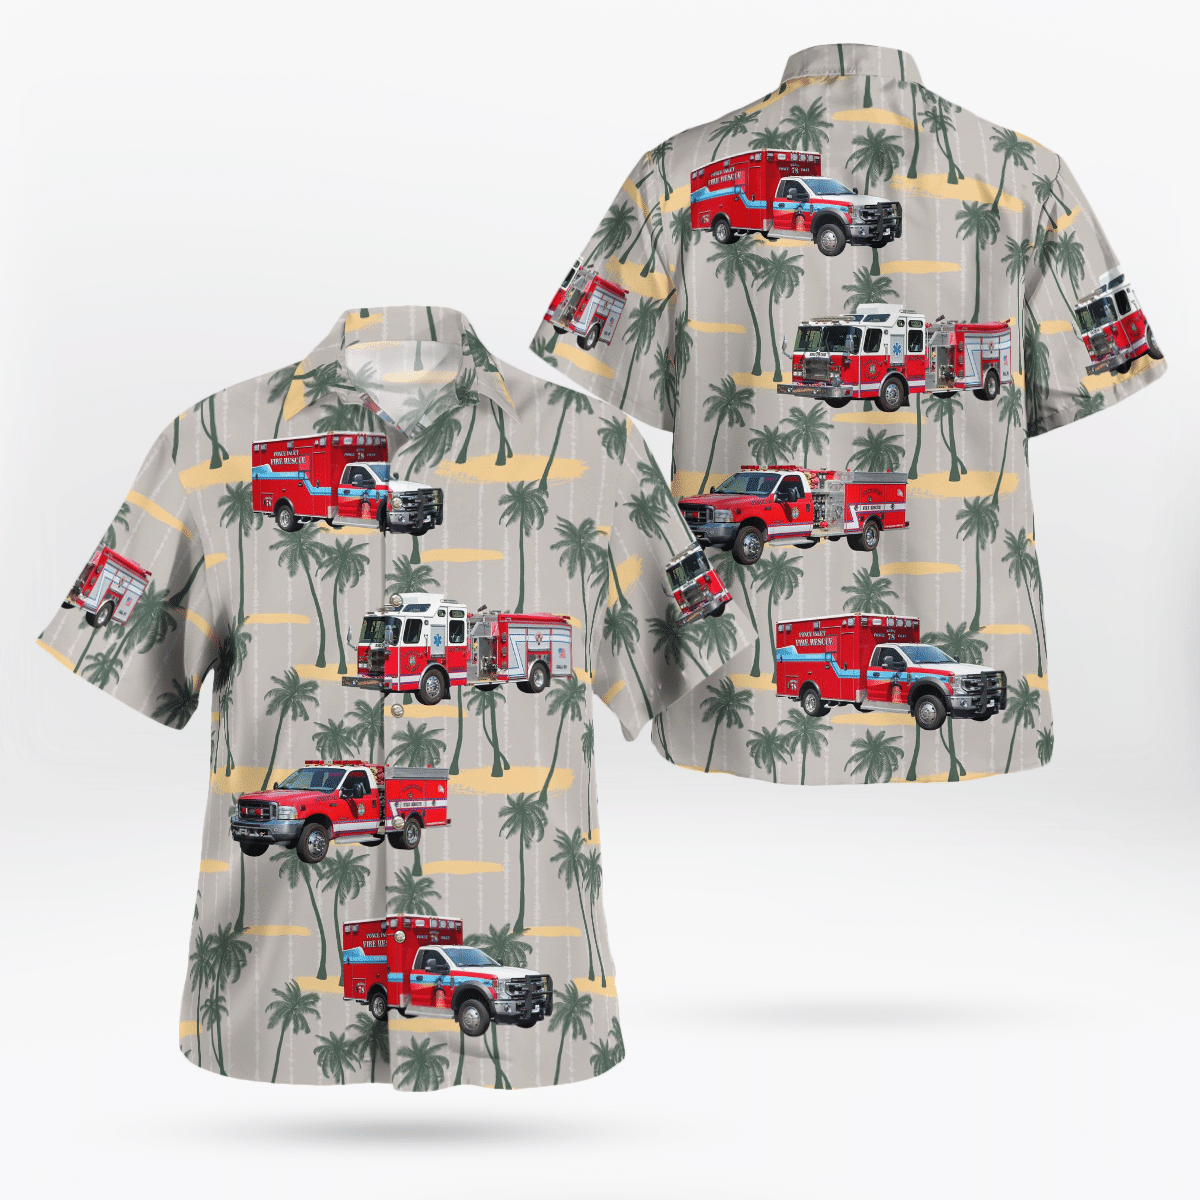 If you are in need of a new summertime look, pick up this Hawaiian shirt 124